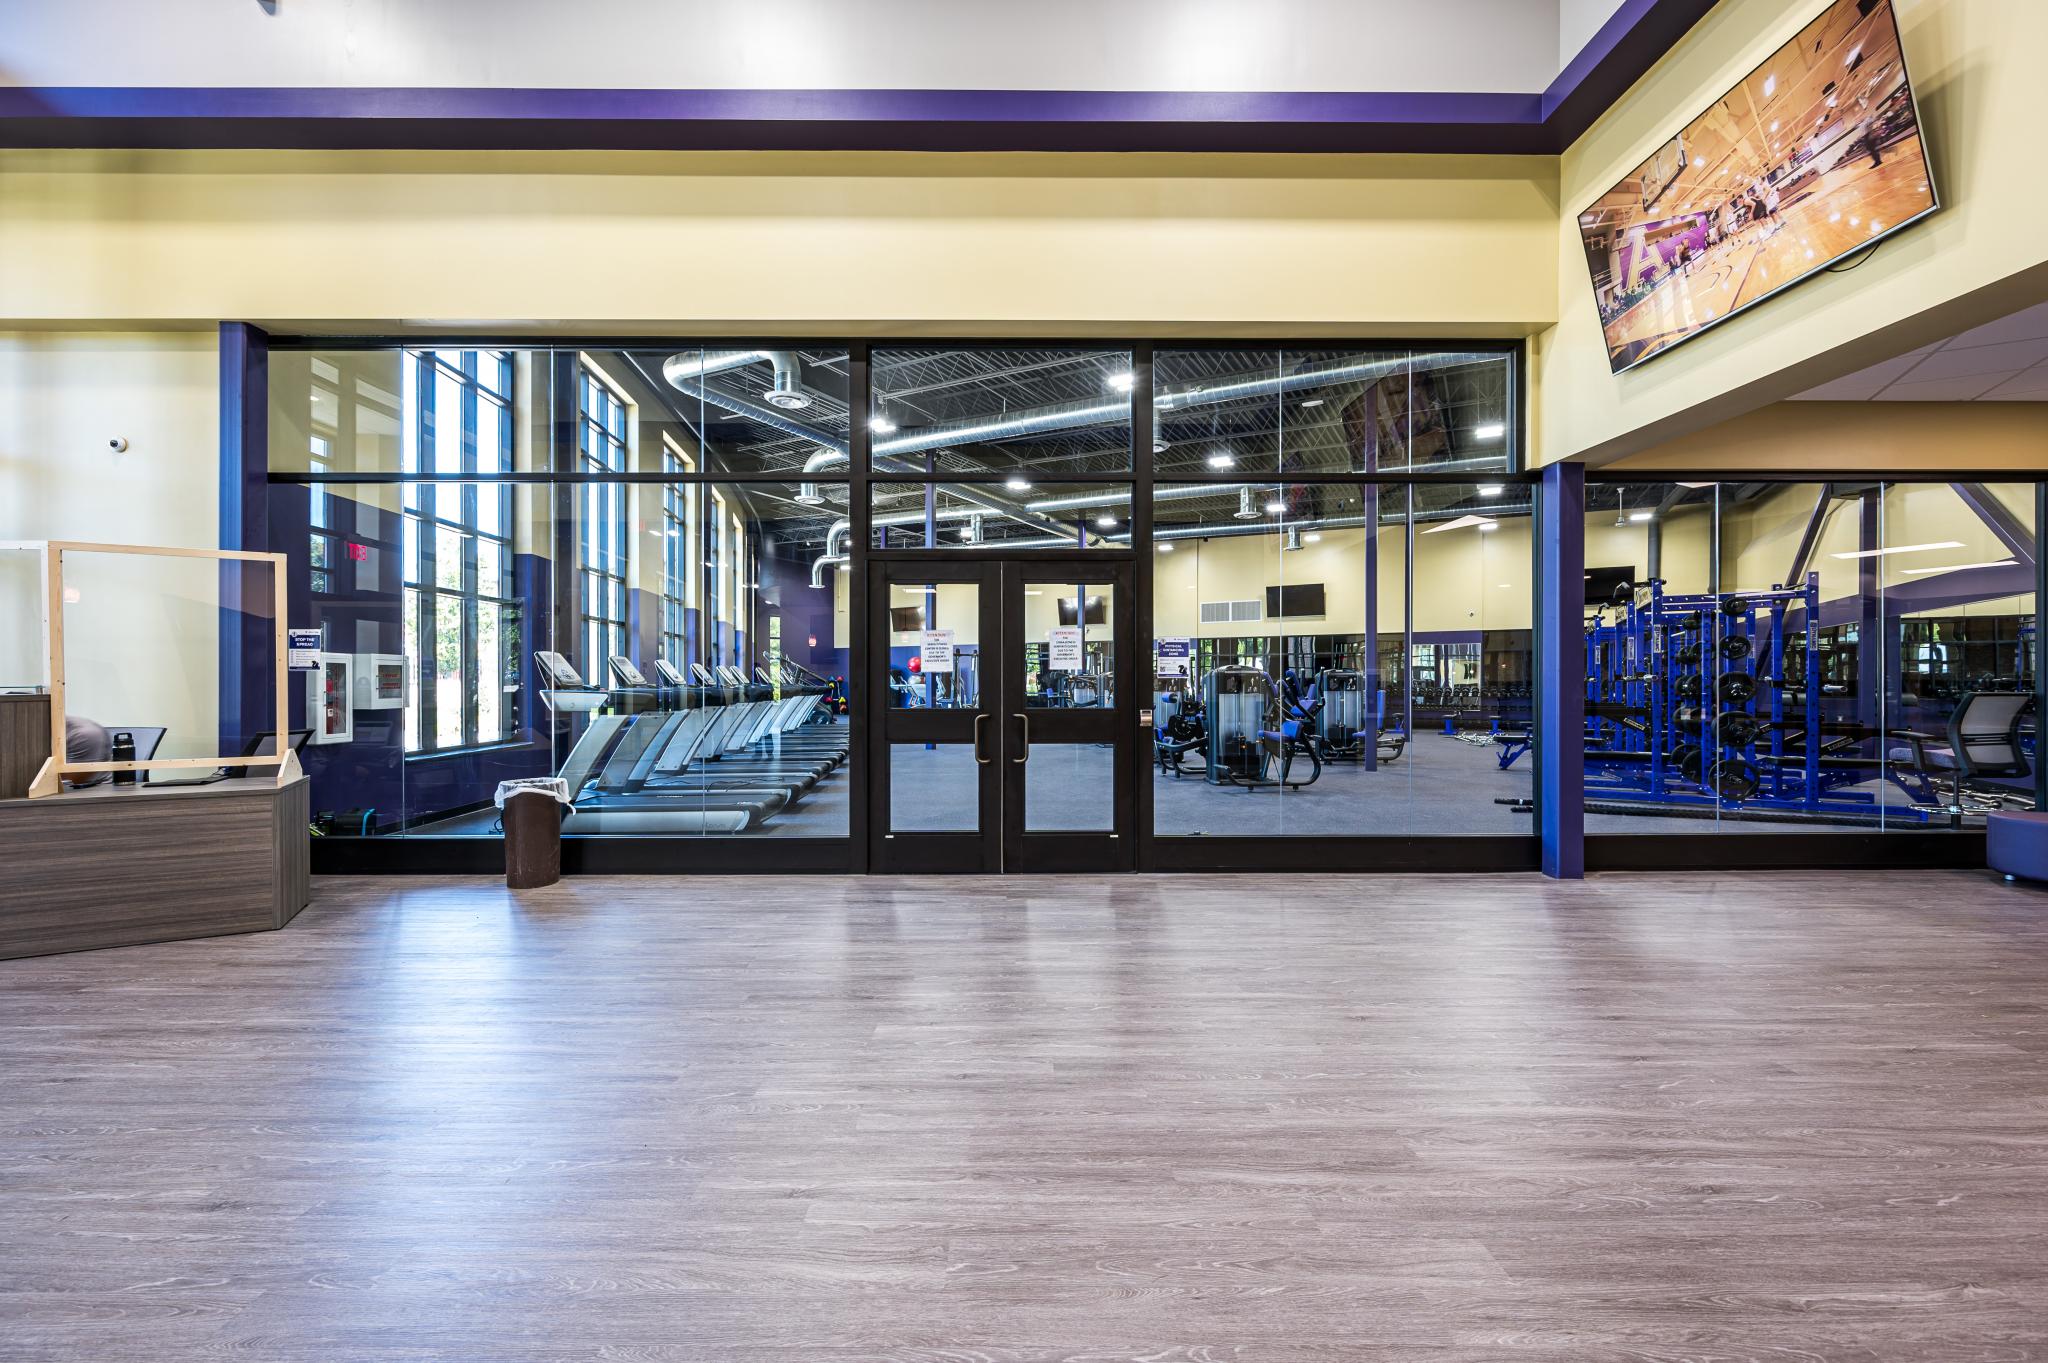 image of pair of glass doors into a room with fitness equipment